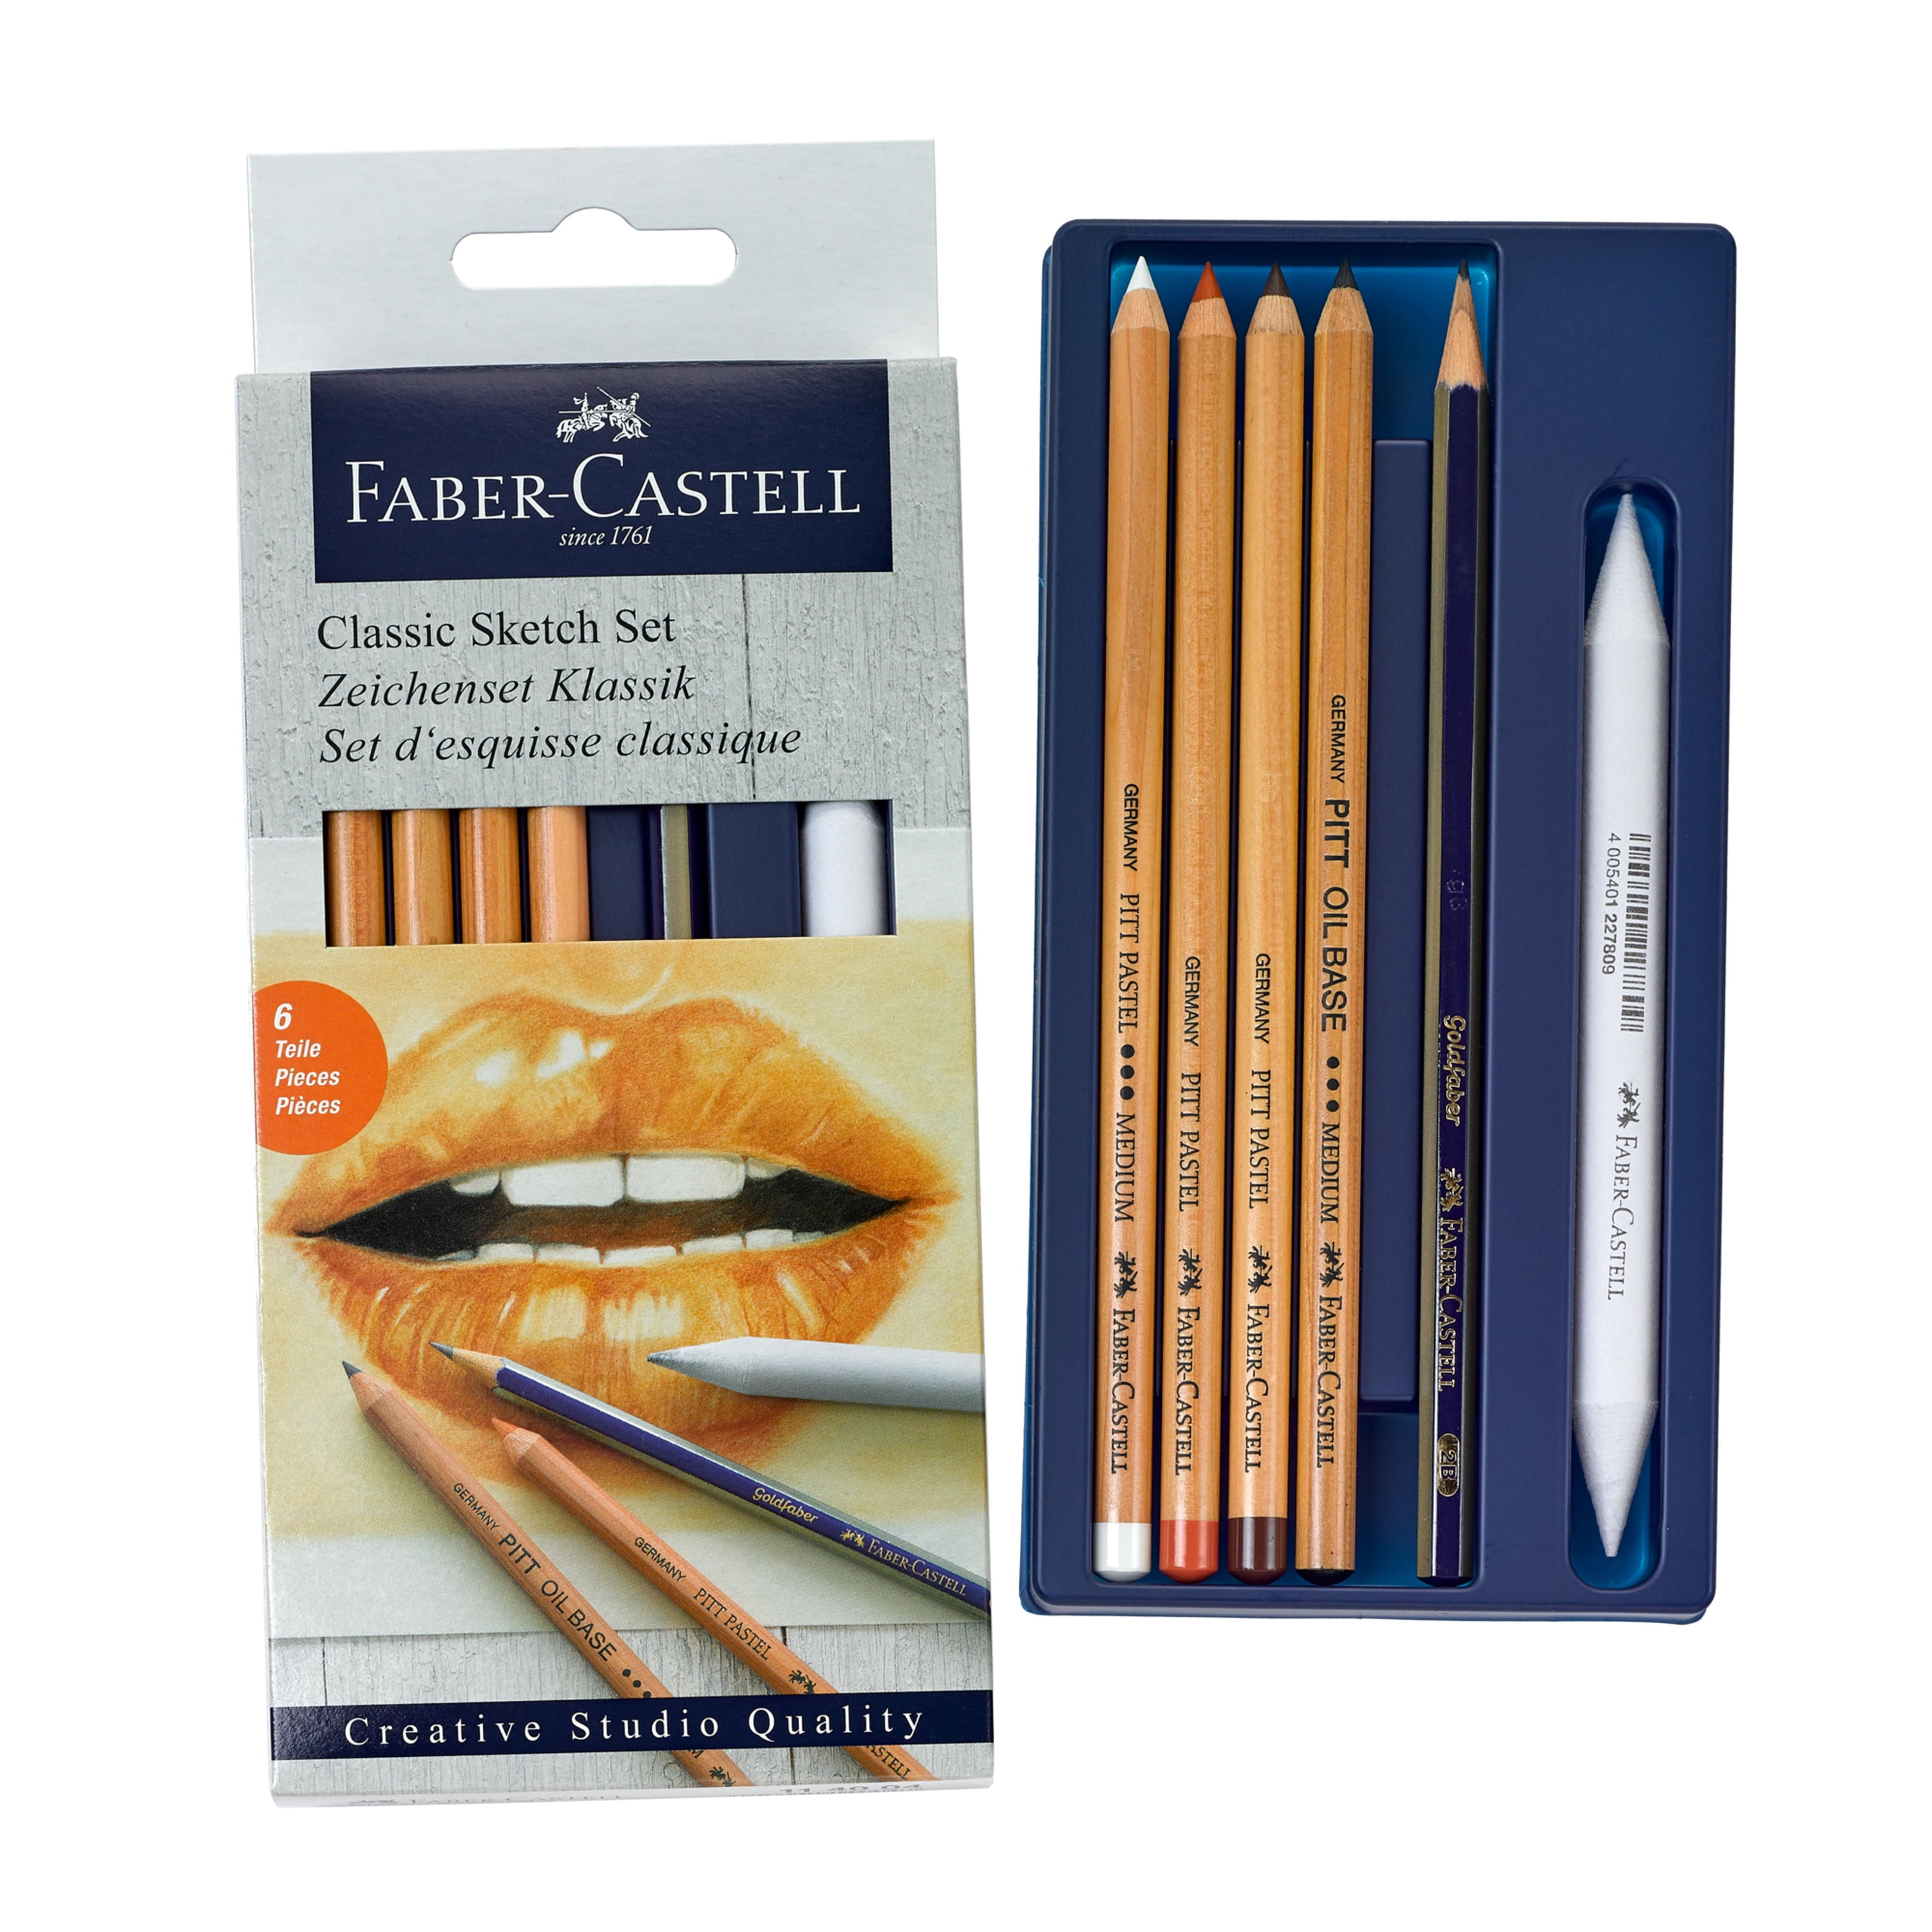 FaberCastell Goldfaber Sketching Pencils and Sets  BLICK Art Materials